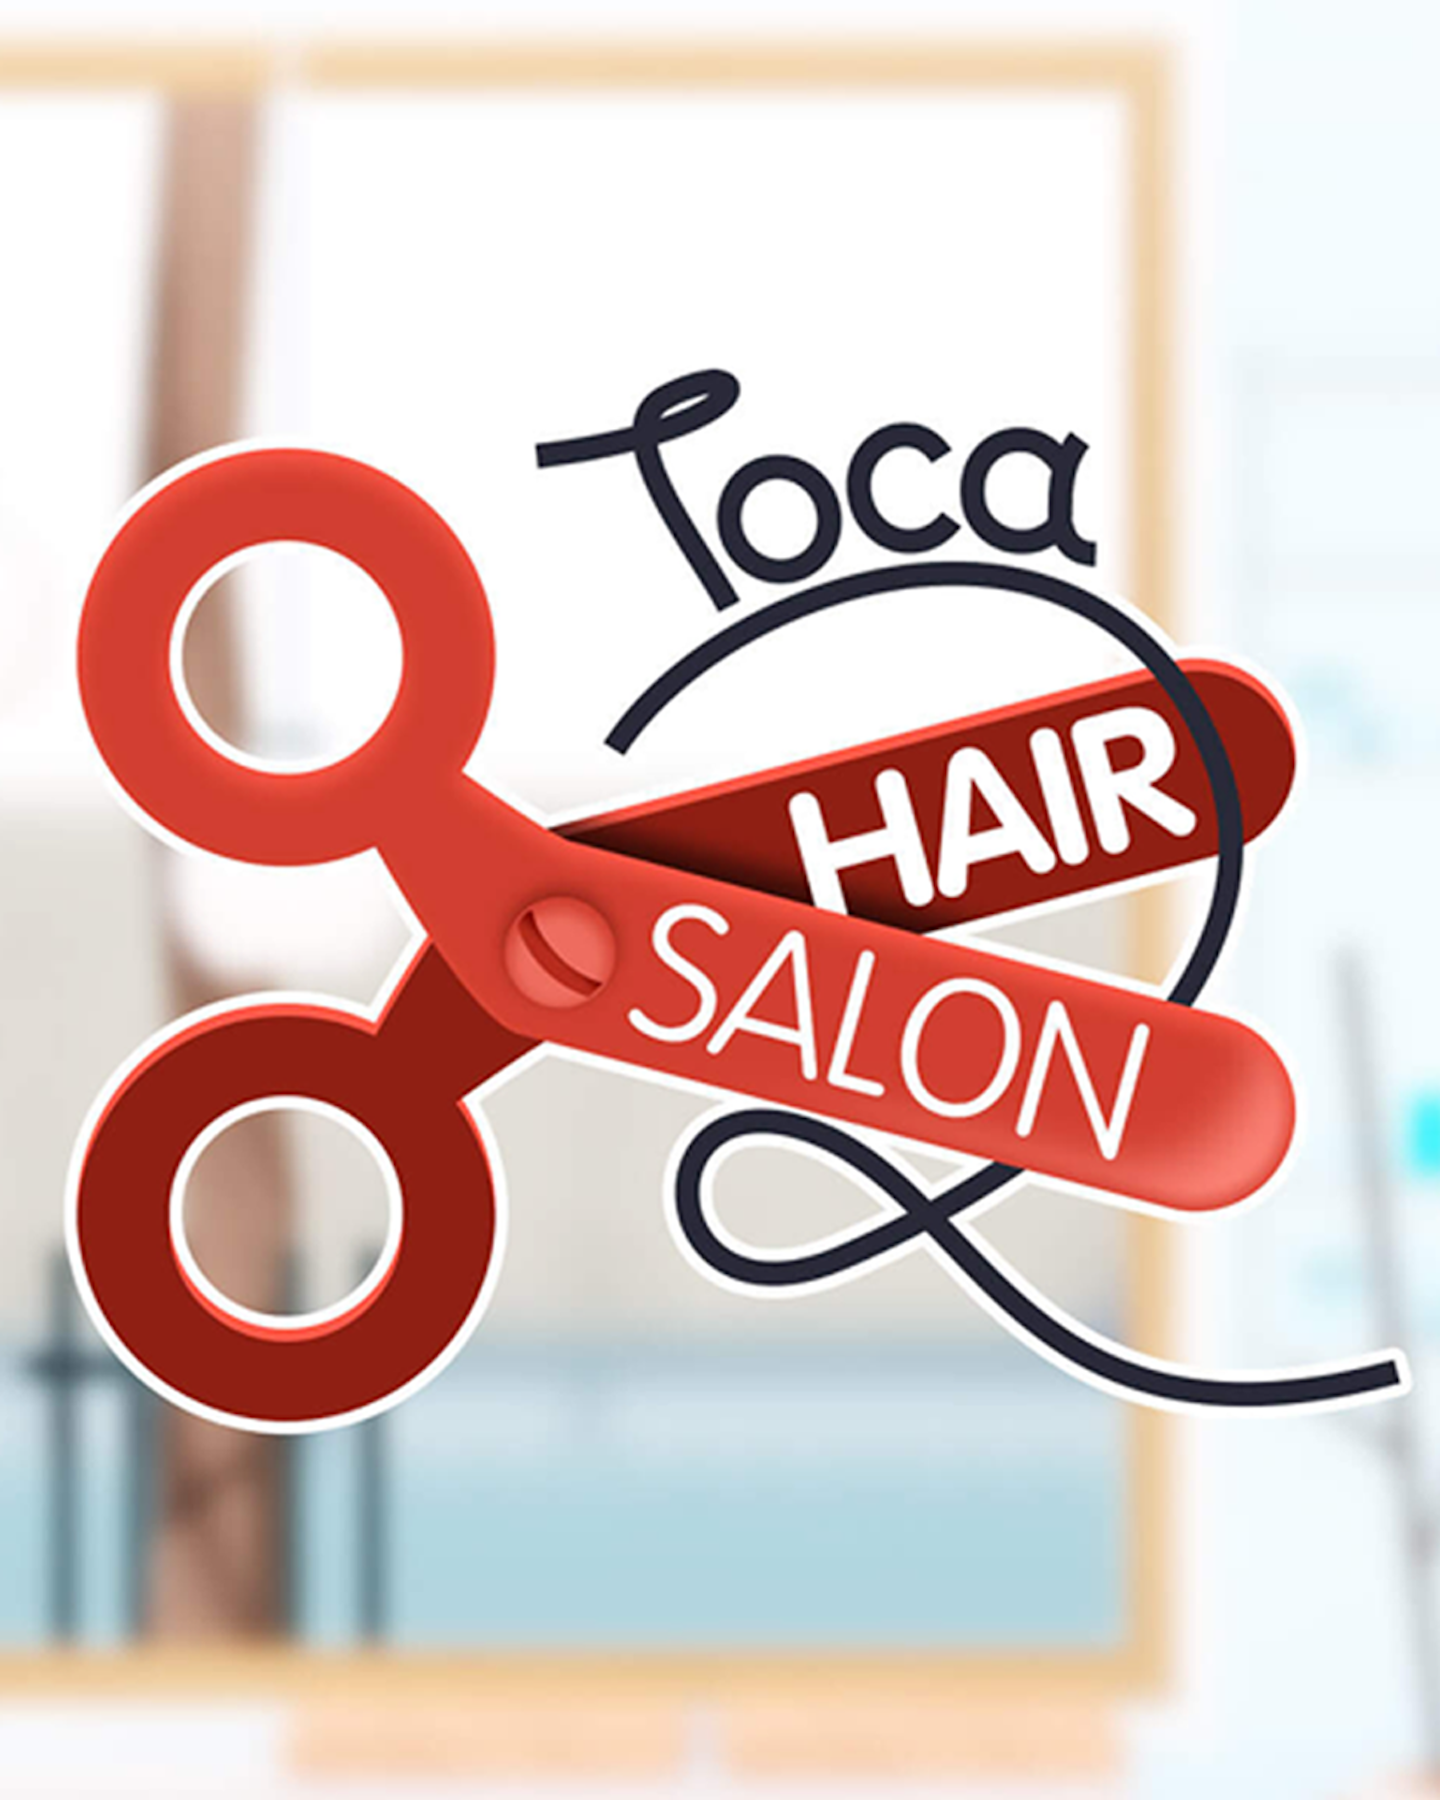 This is a zoomed in image of key art for Toca Hair Salon 2. The background image is out of focus but looks like a hair salon. The Toca Hair Salon 2 logo is in the middle of the image and some words are on a large pair of red scissors